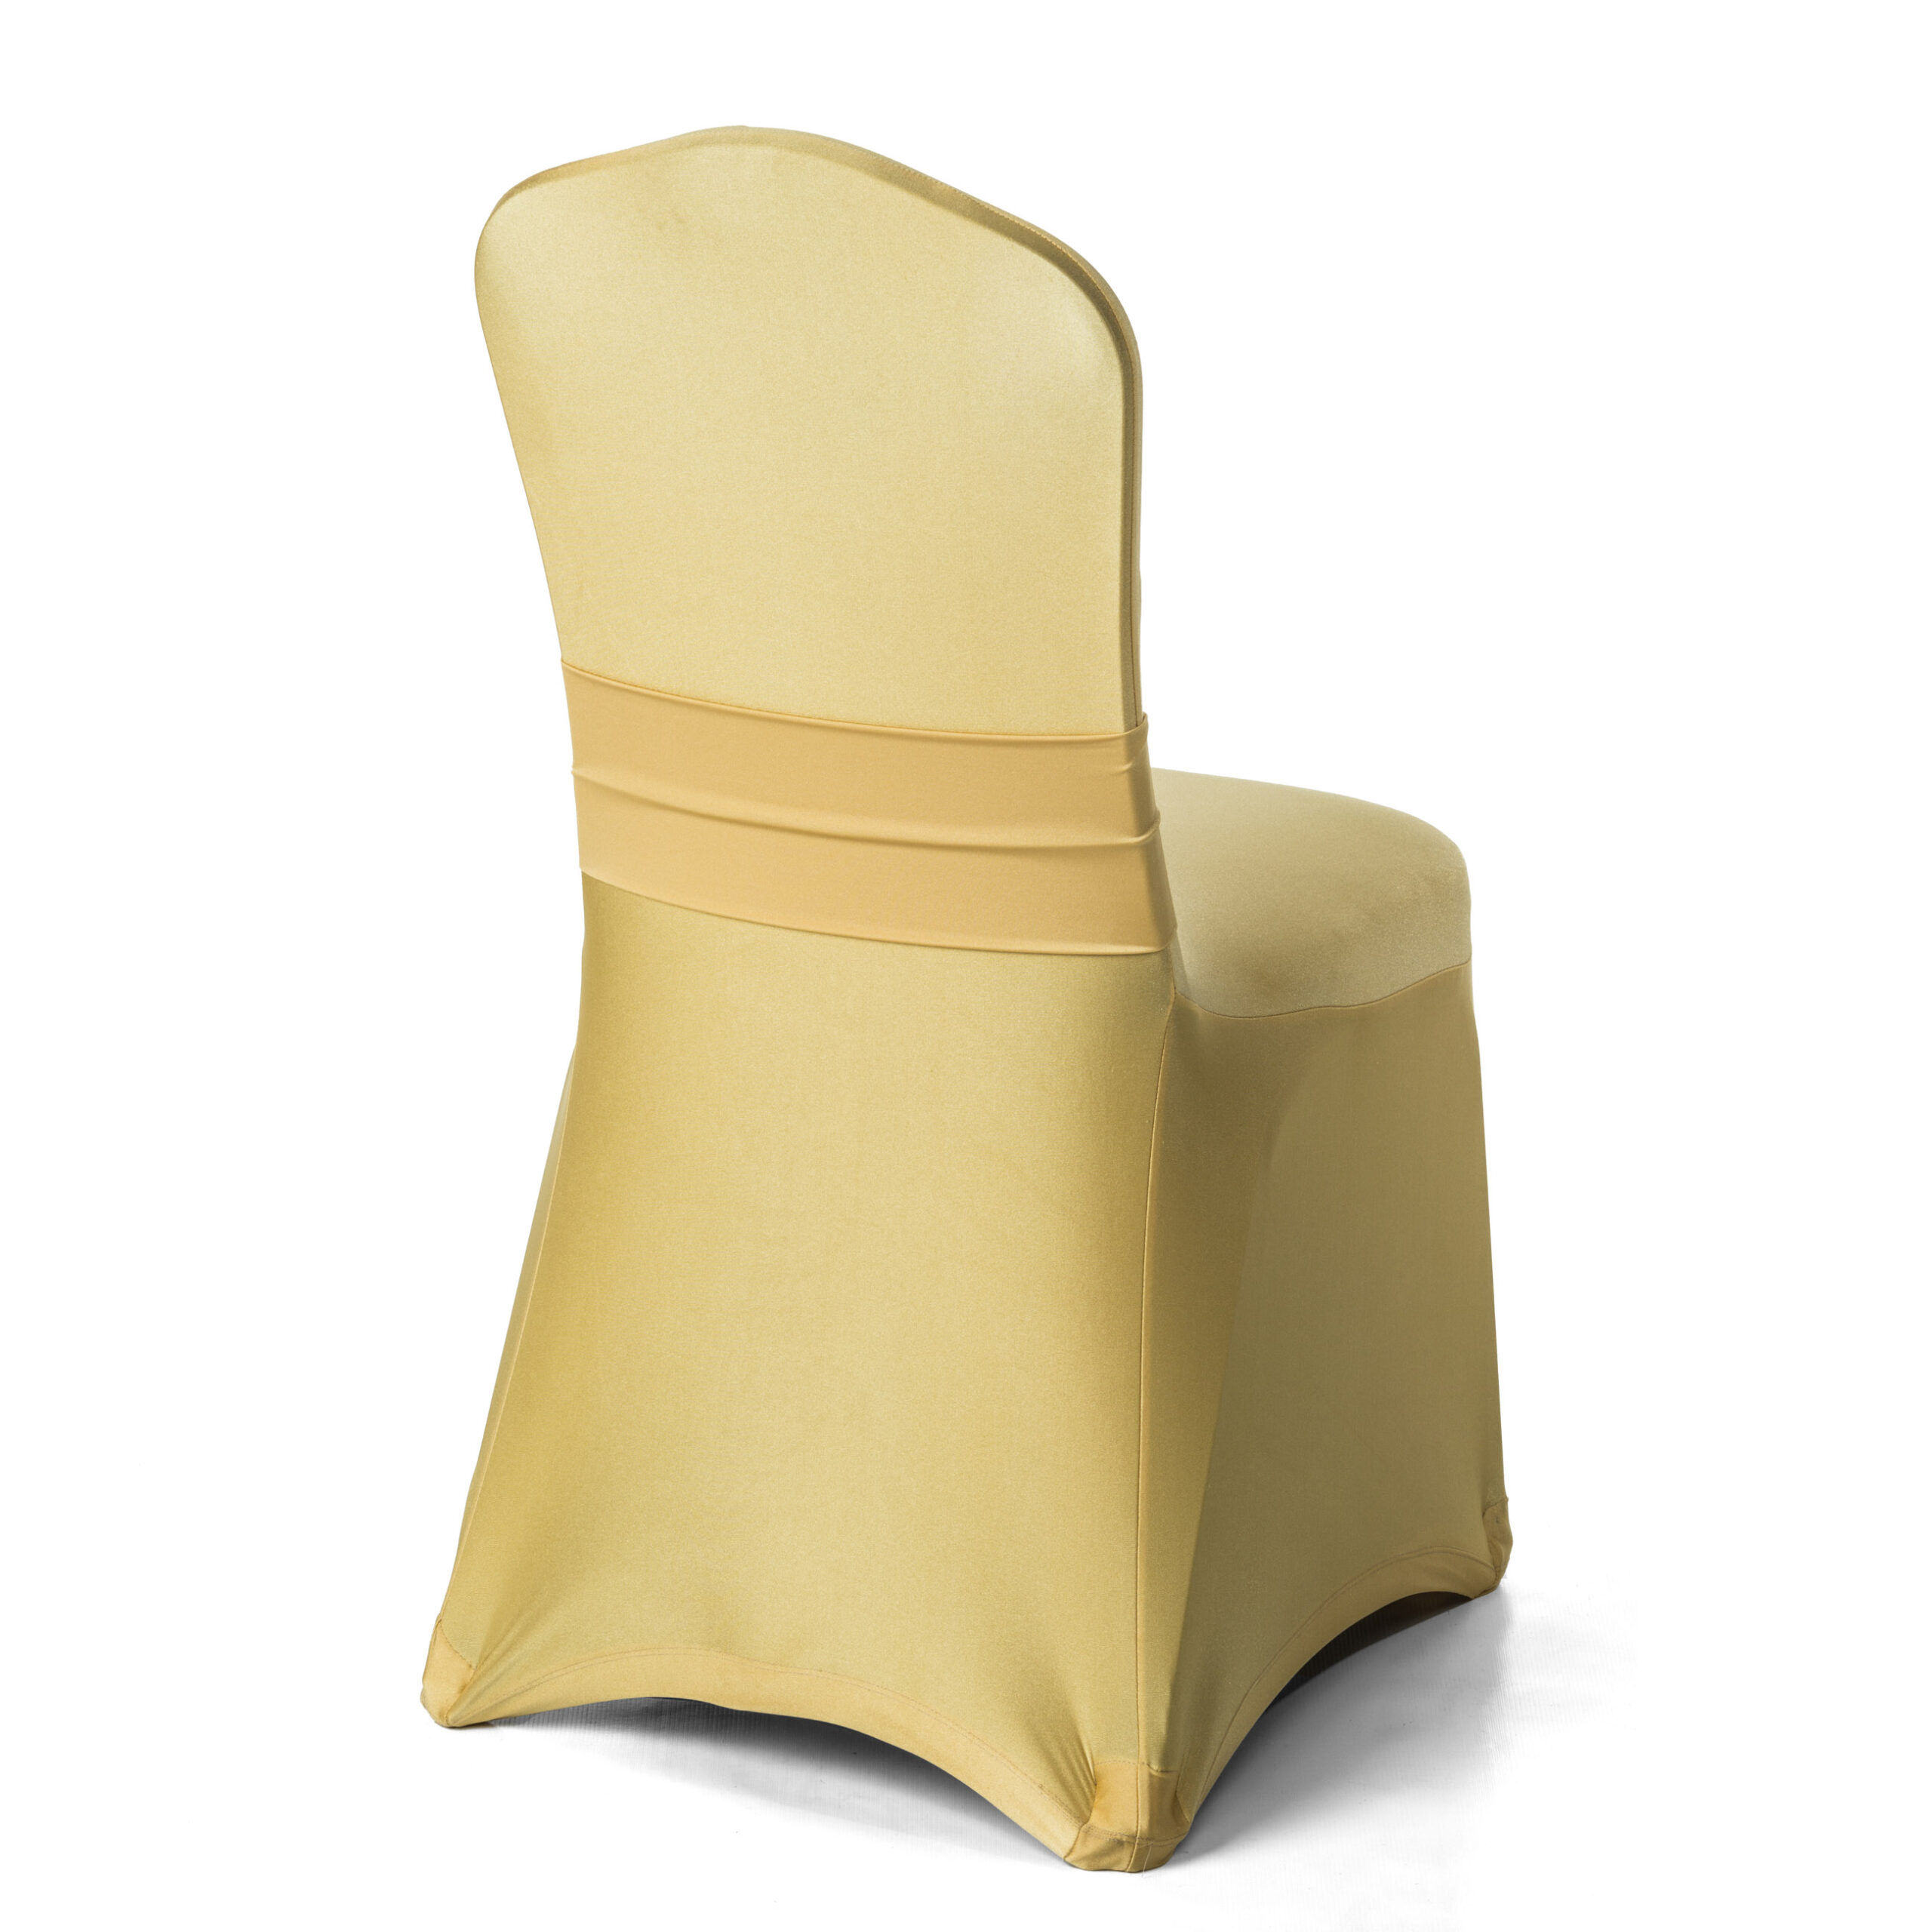 Antique Gold Spandex Chair Cover - Over The Top